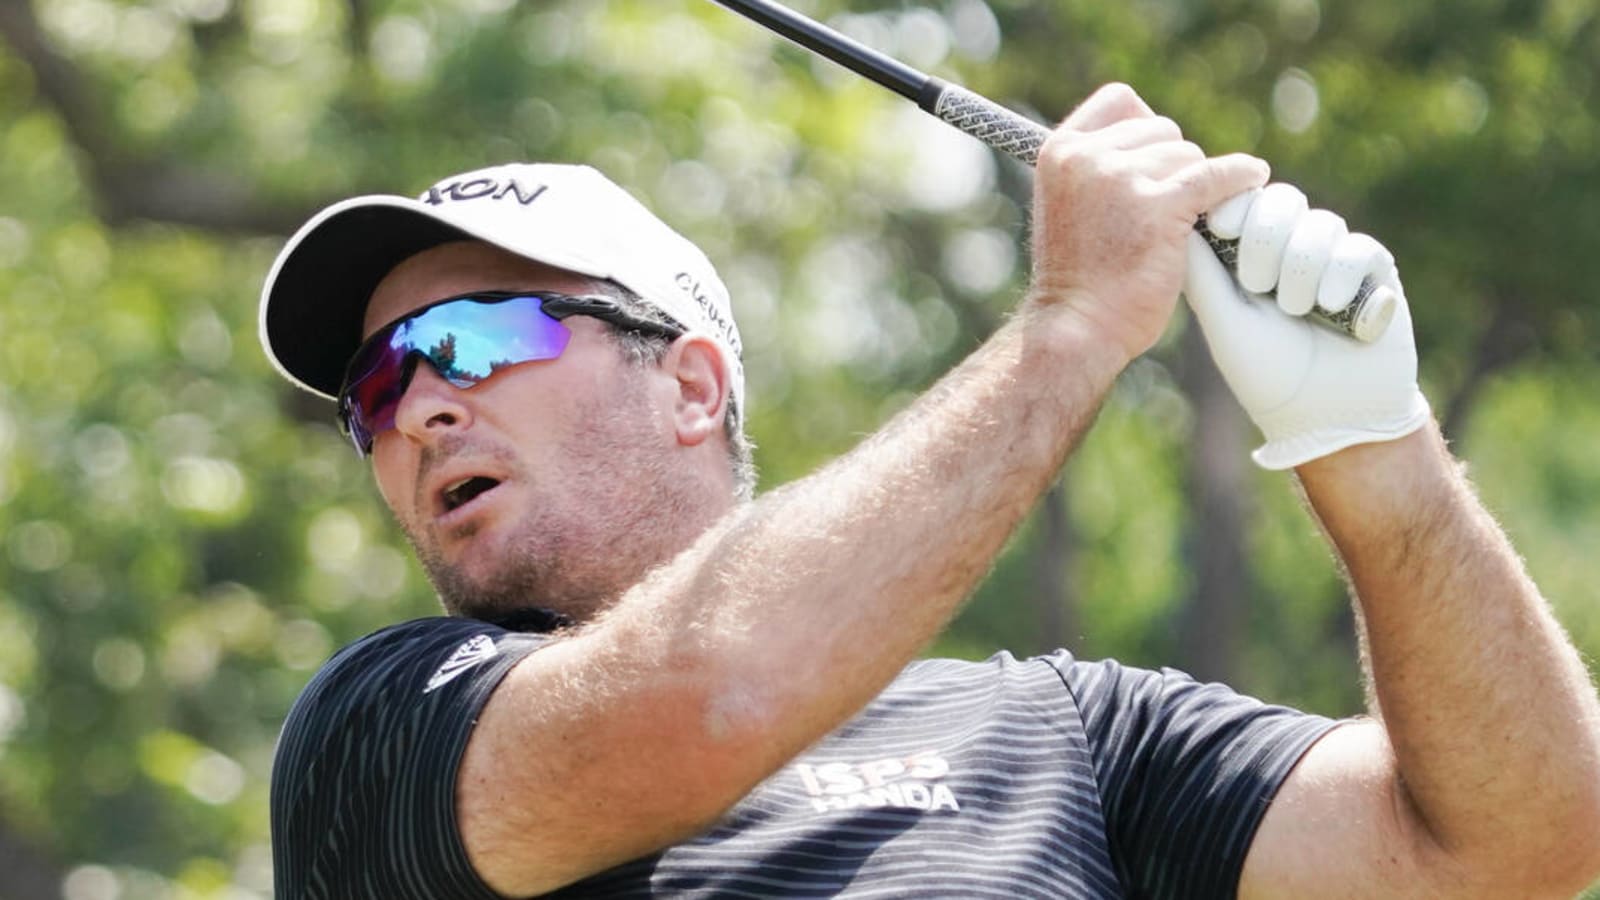 Watch: Ryan Fox sinks a hole-in-one on the iconic 17th hole at the Players Championship